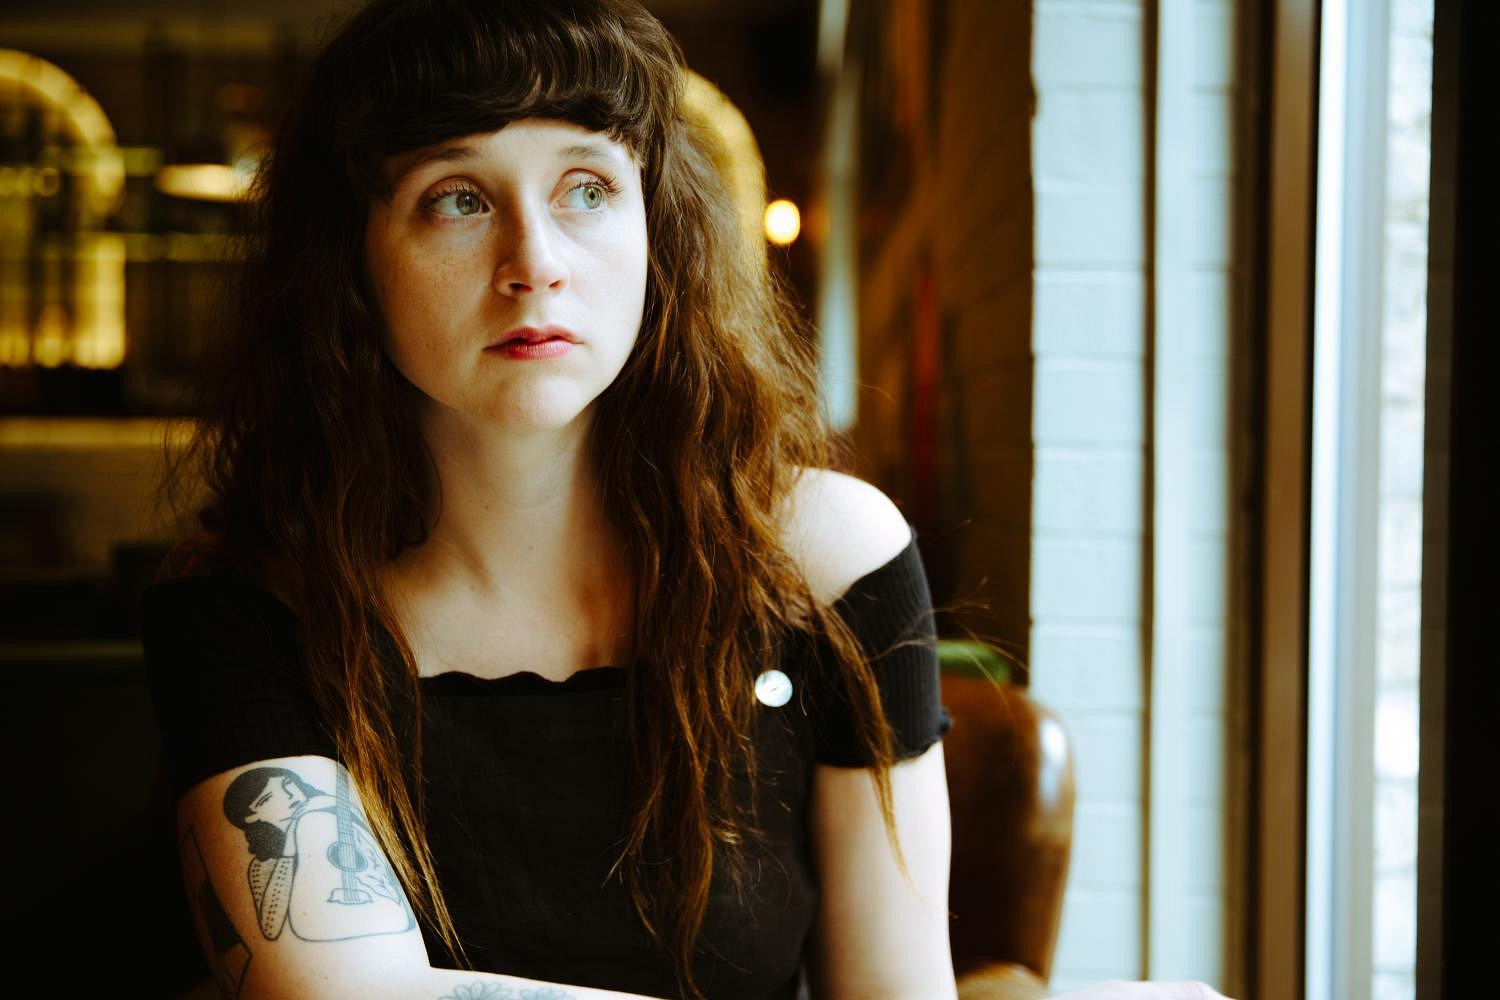 Stream Waxahatchee’s new album ‘Out In The Storm’ in full